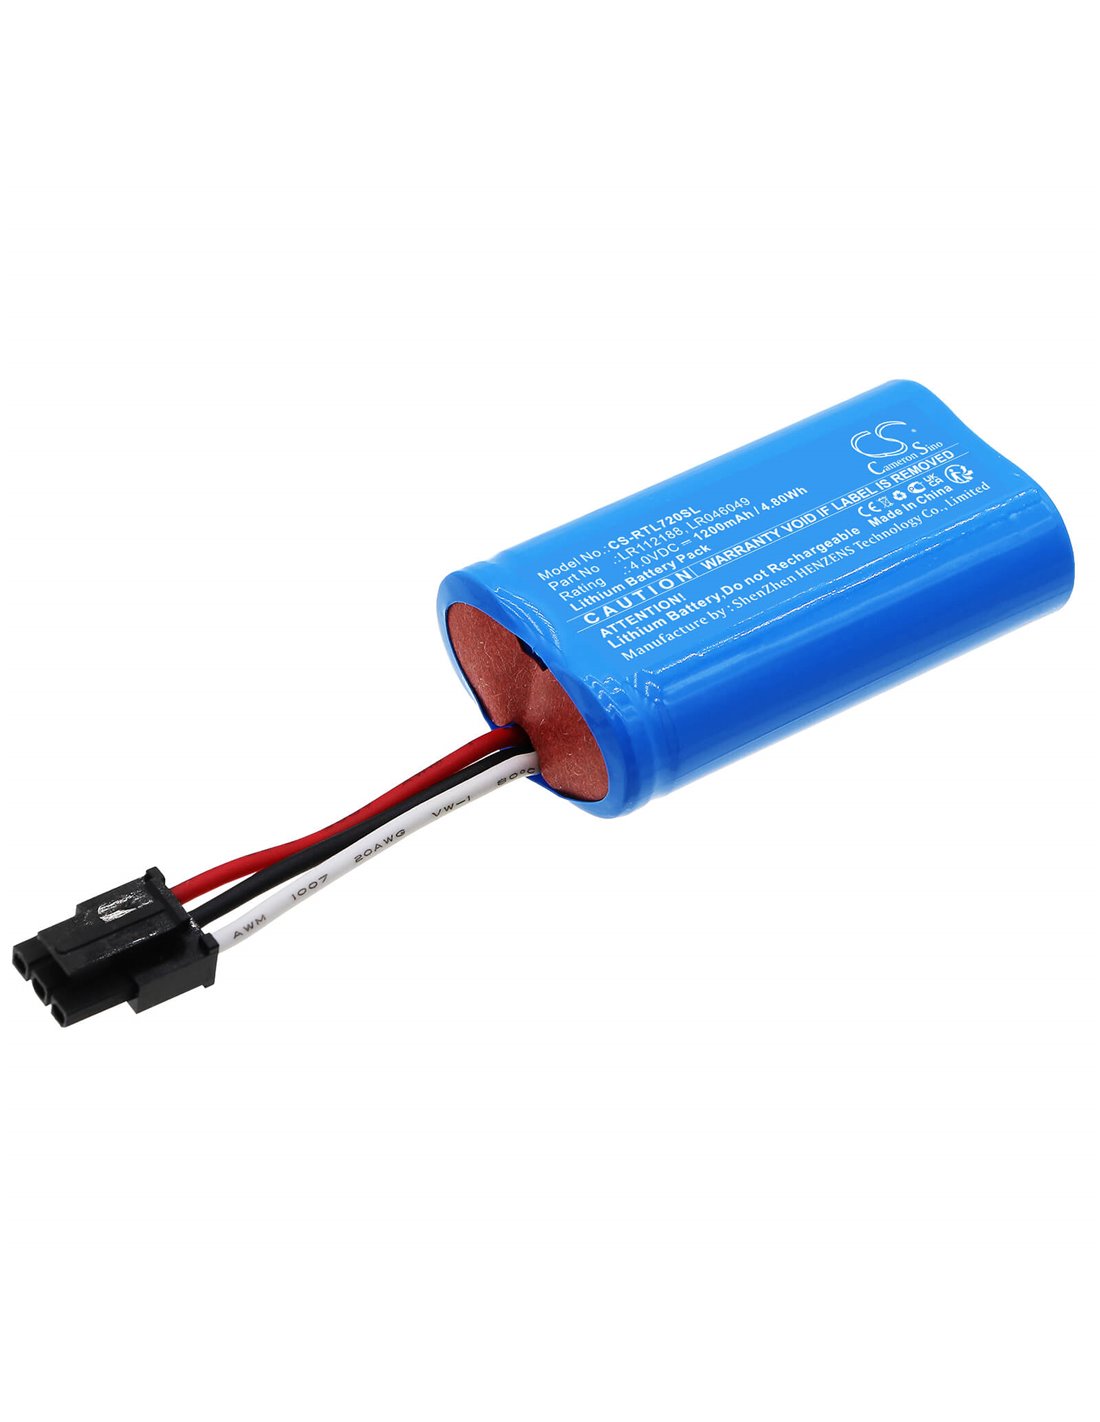 4.0V, Lithium, 1200mAh, Battery fits Range Rover, Discovery 2017, Evoque 2014, 4.80Wh